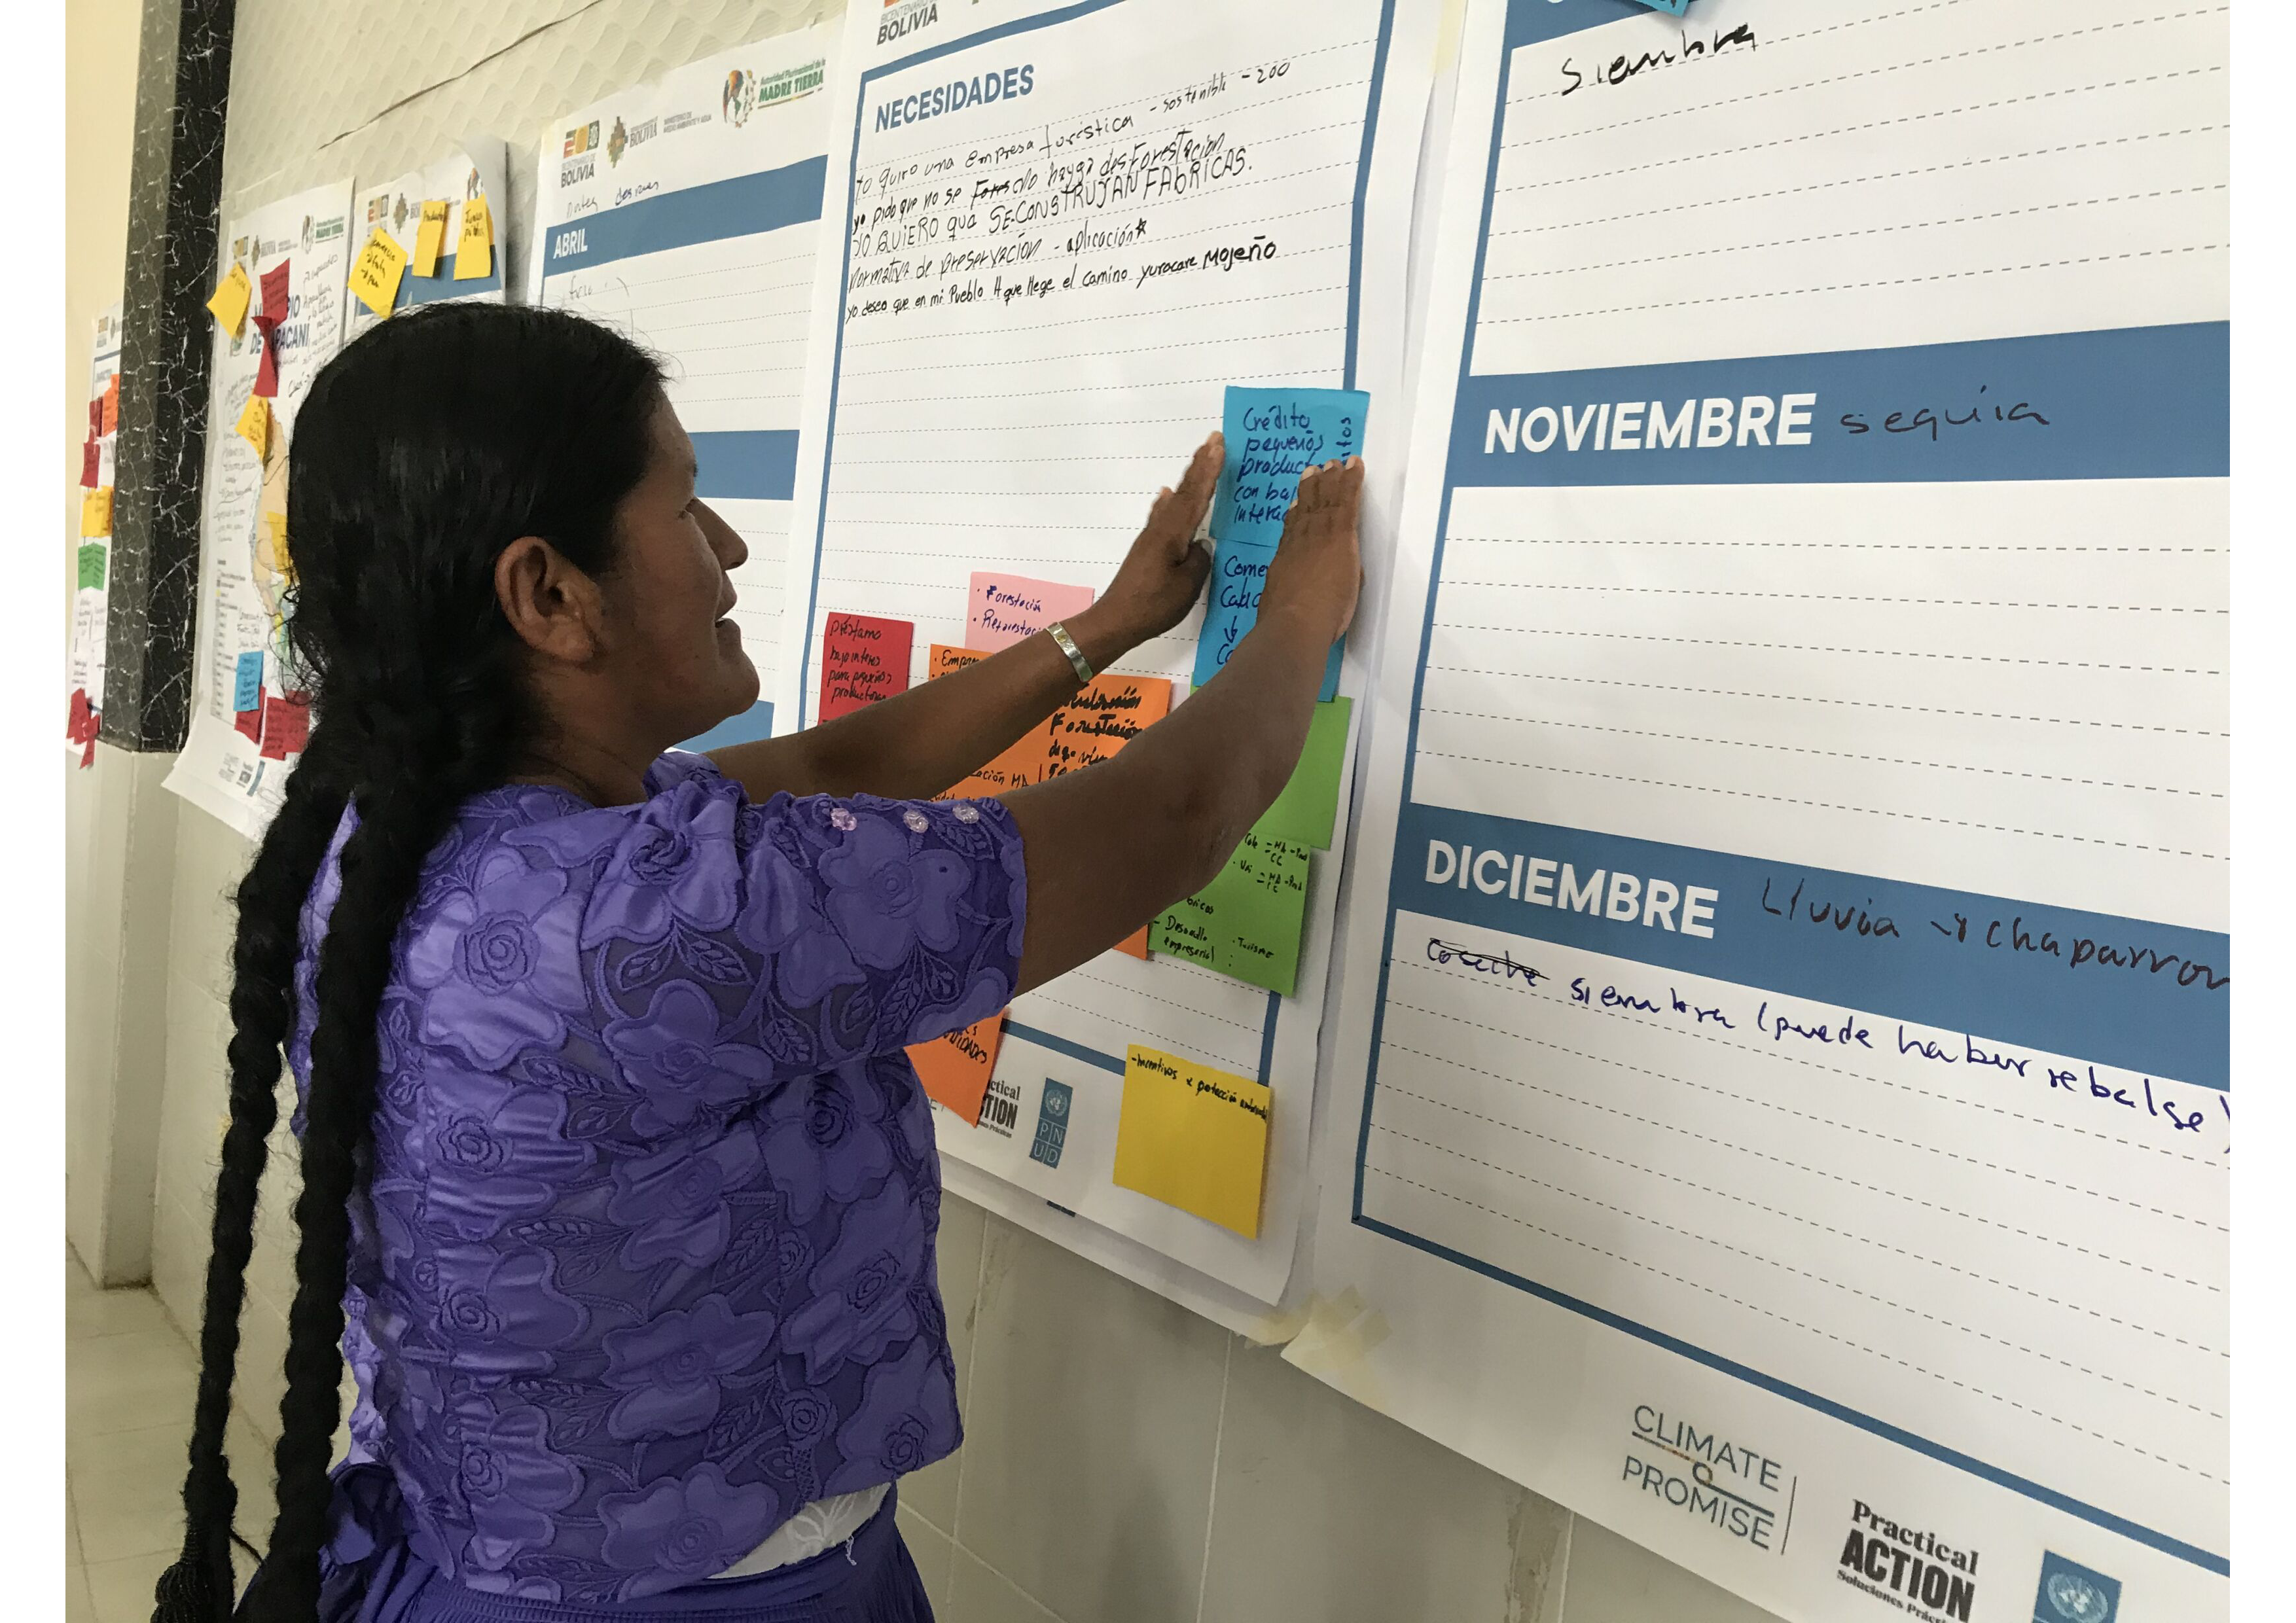 A woman is placing a sticky note on a whiteboard that is being used for event planning or project management, with various sections marked by months such as november and december written in spanish.